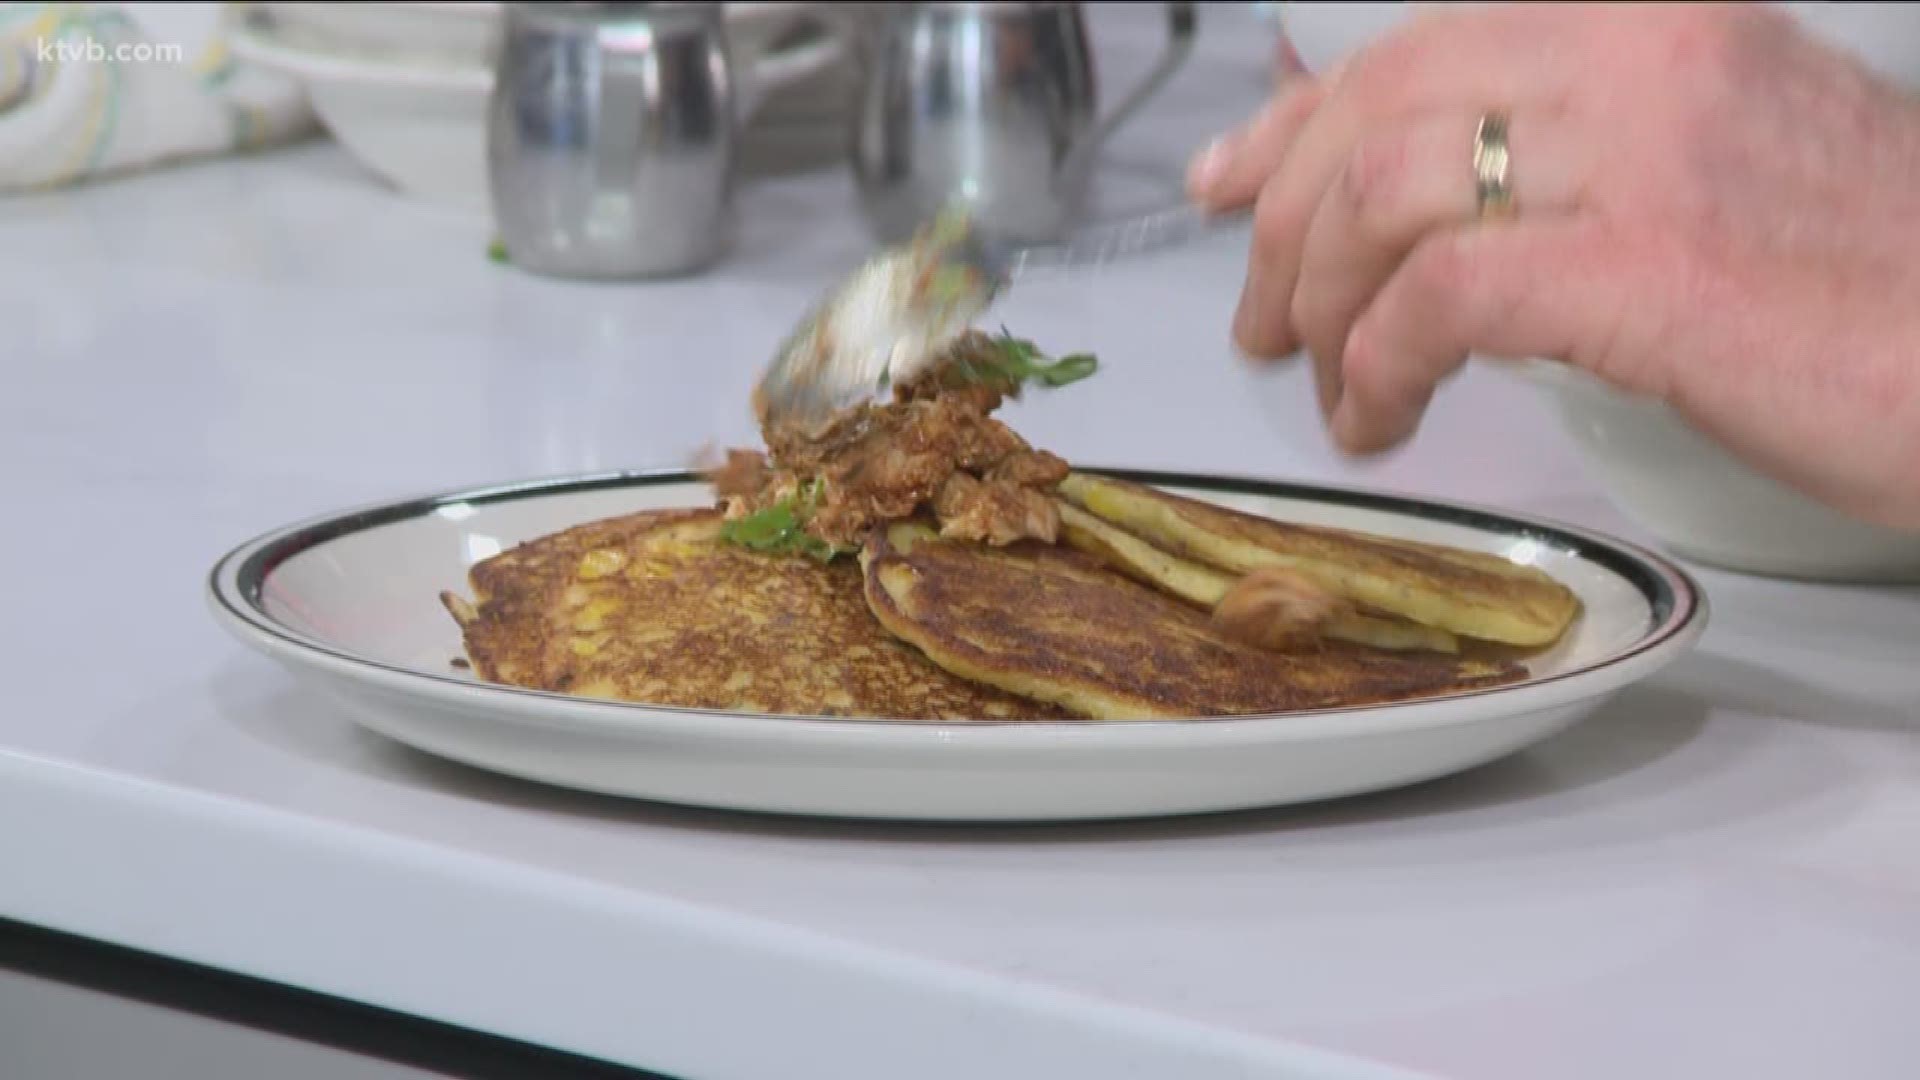 Recipe from Chef Lou Aaron, demonstrated on April 7.